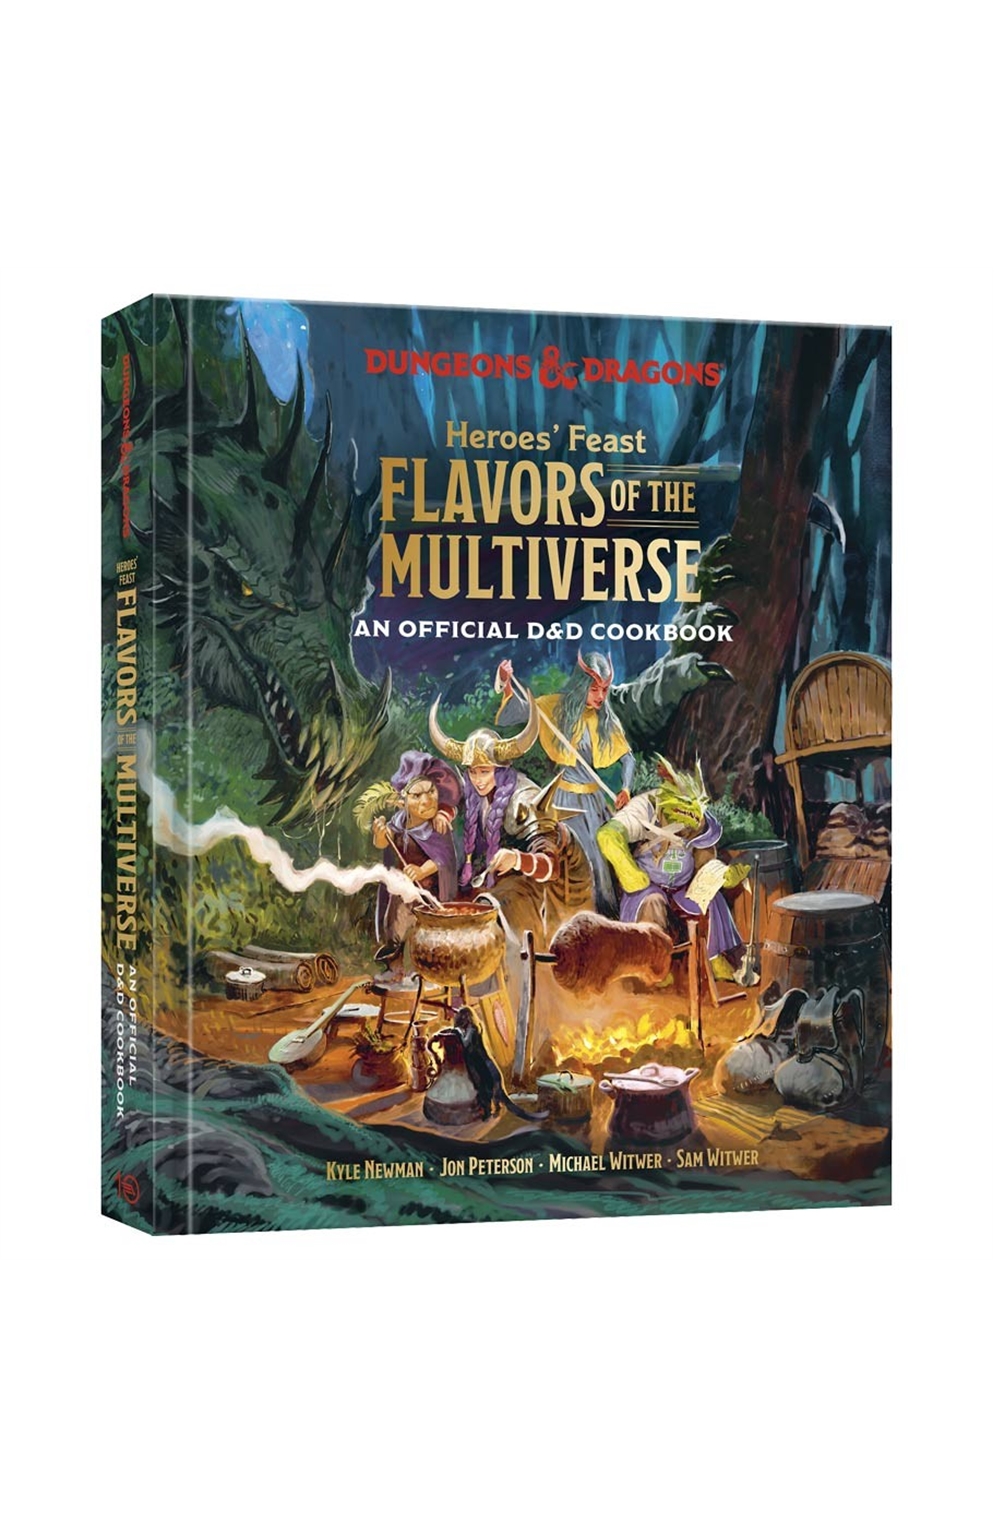 Dungeons And Dragons: Heroes' Feast Flavors of The Multiverse Hardcover